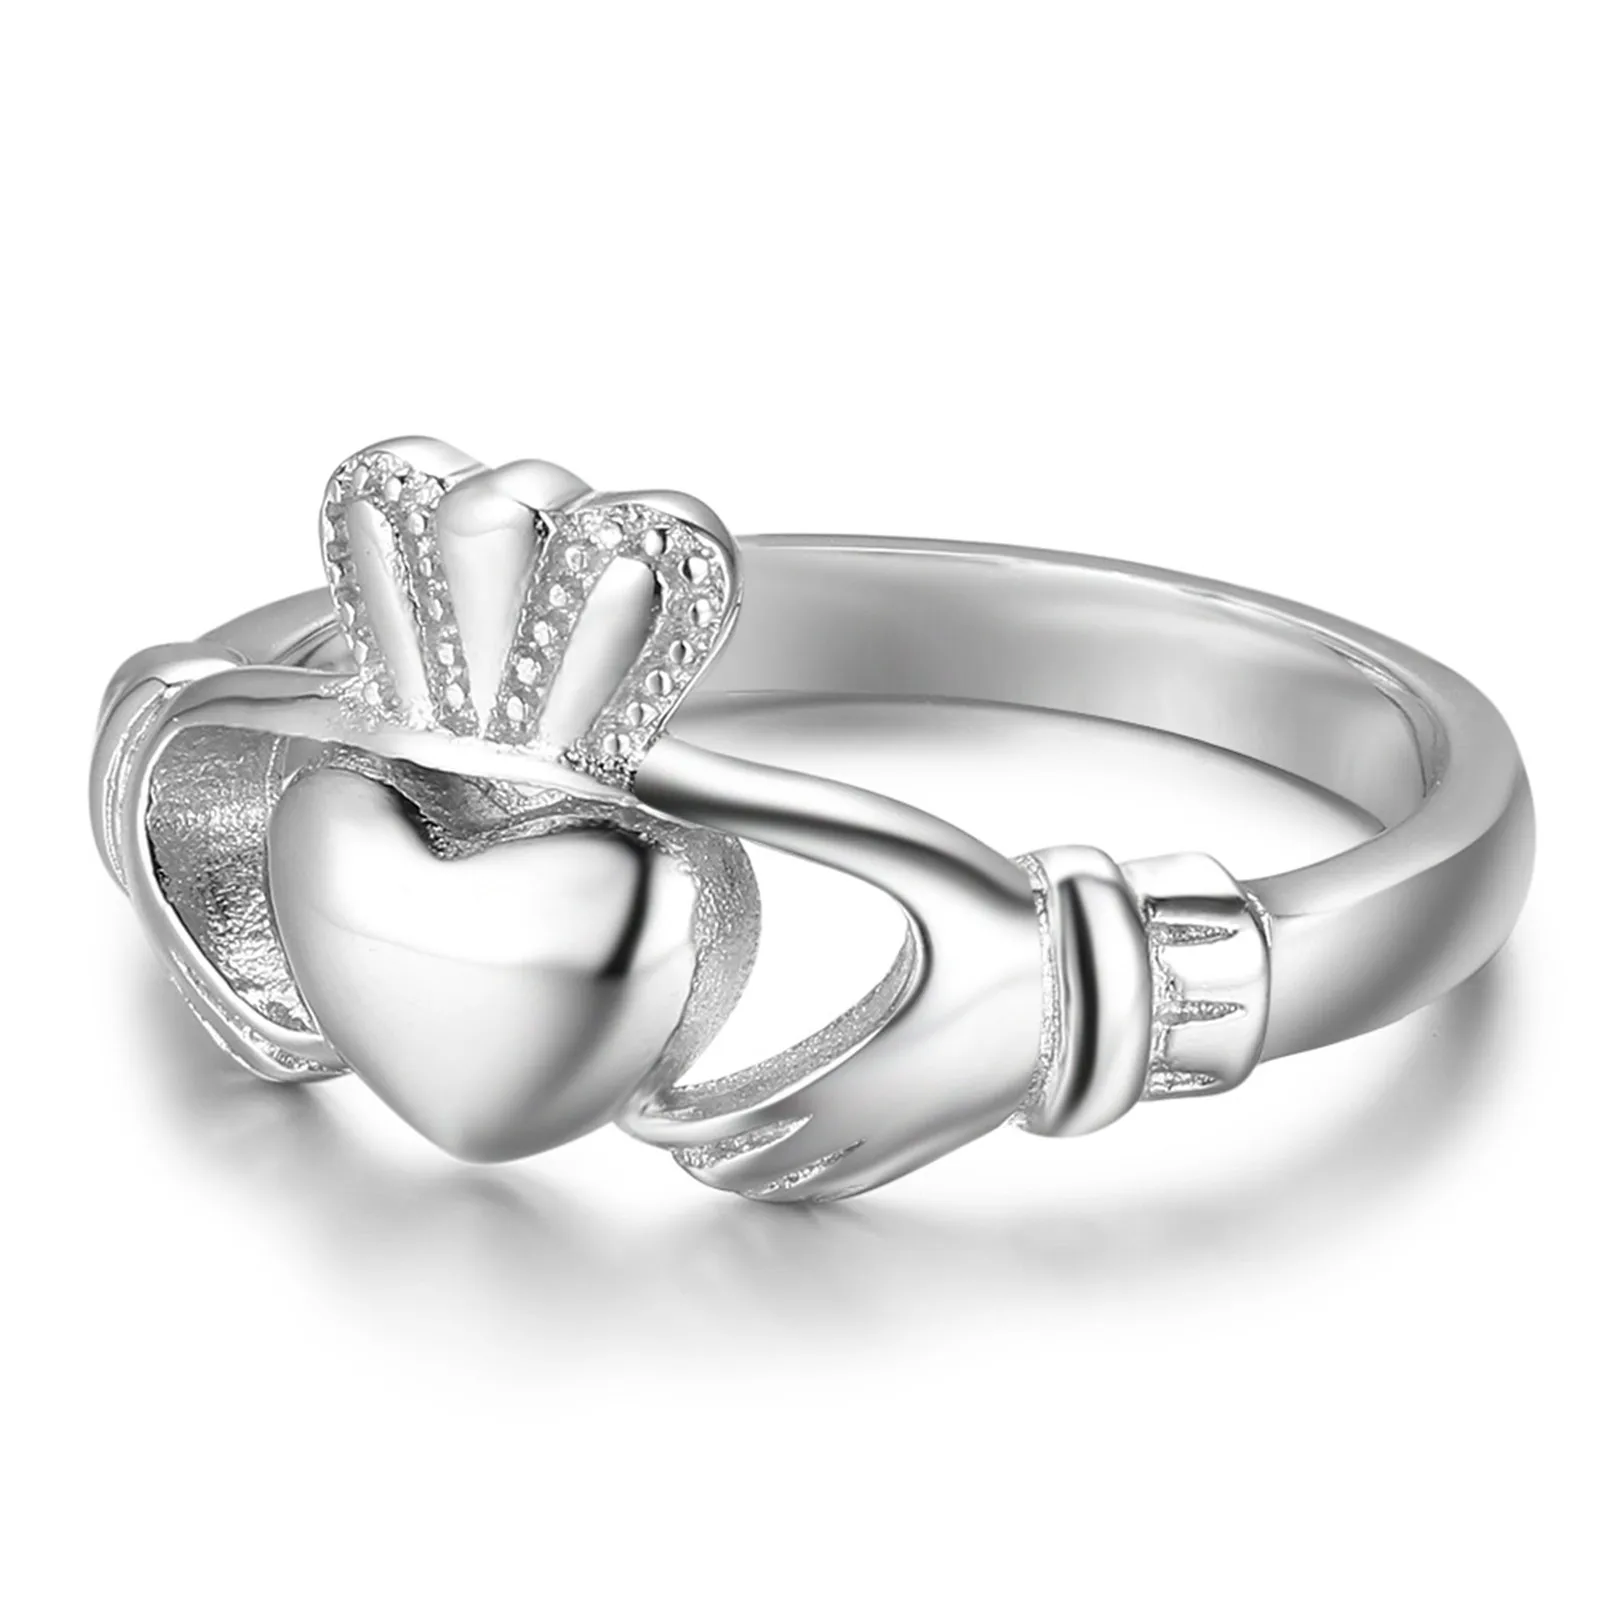 

Irish Claddagh Ring 925 Silver for Women Promise Wedding Hands Heart Crown Ireland Style Classic Design Romantic Jewelry